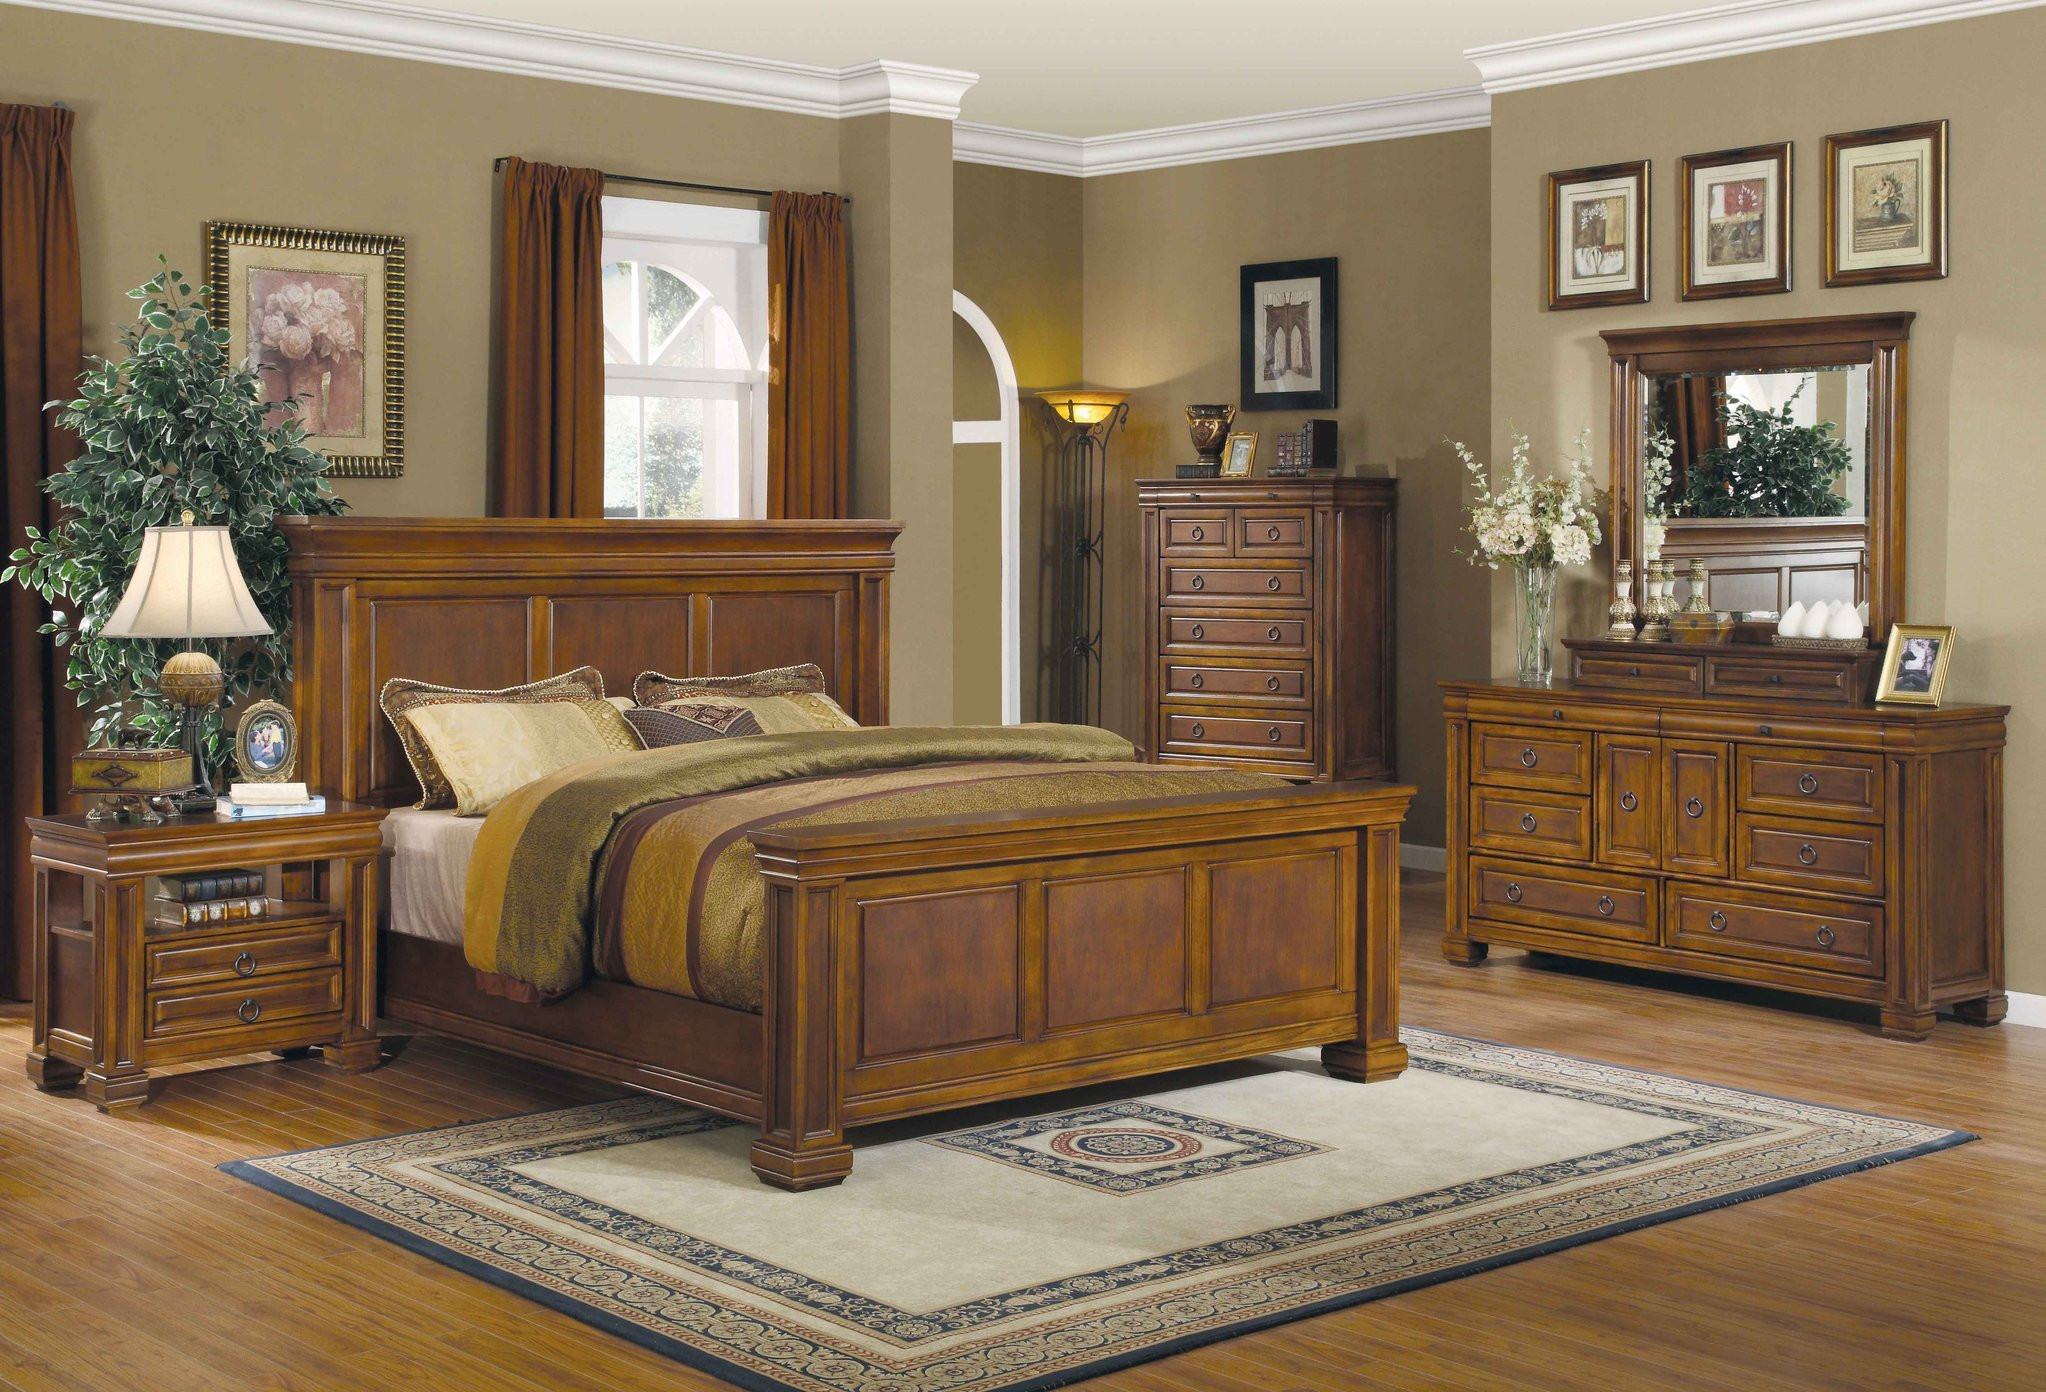 Rustic White Bedroom Furniture
 Antique Rustic Bedroom Furniture Wood King and Queen